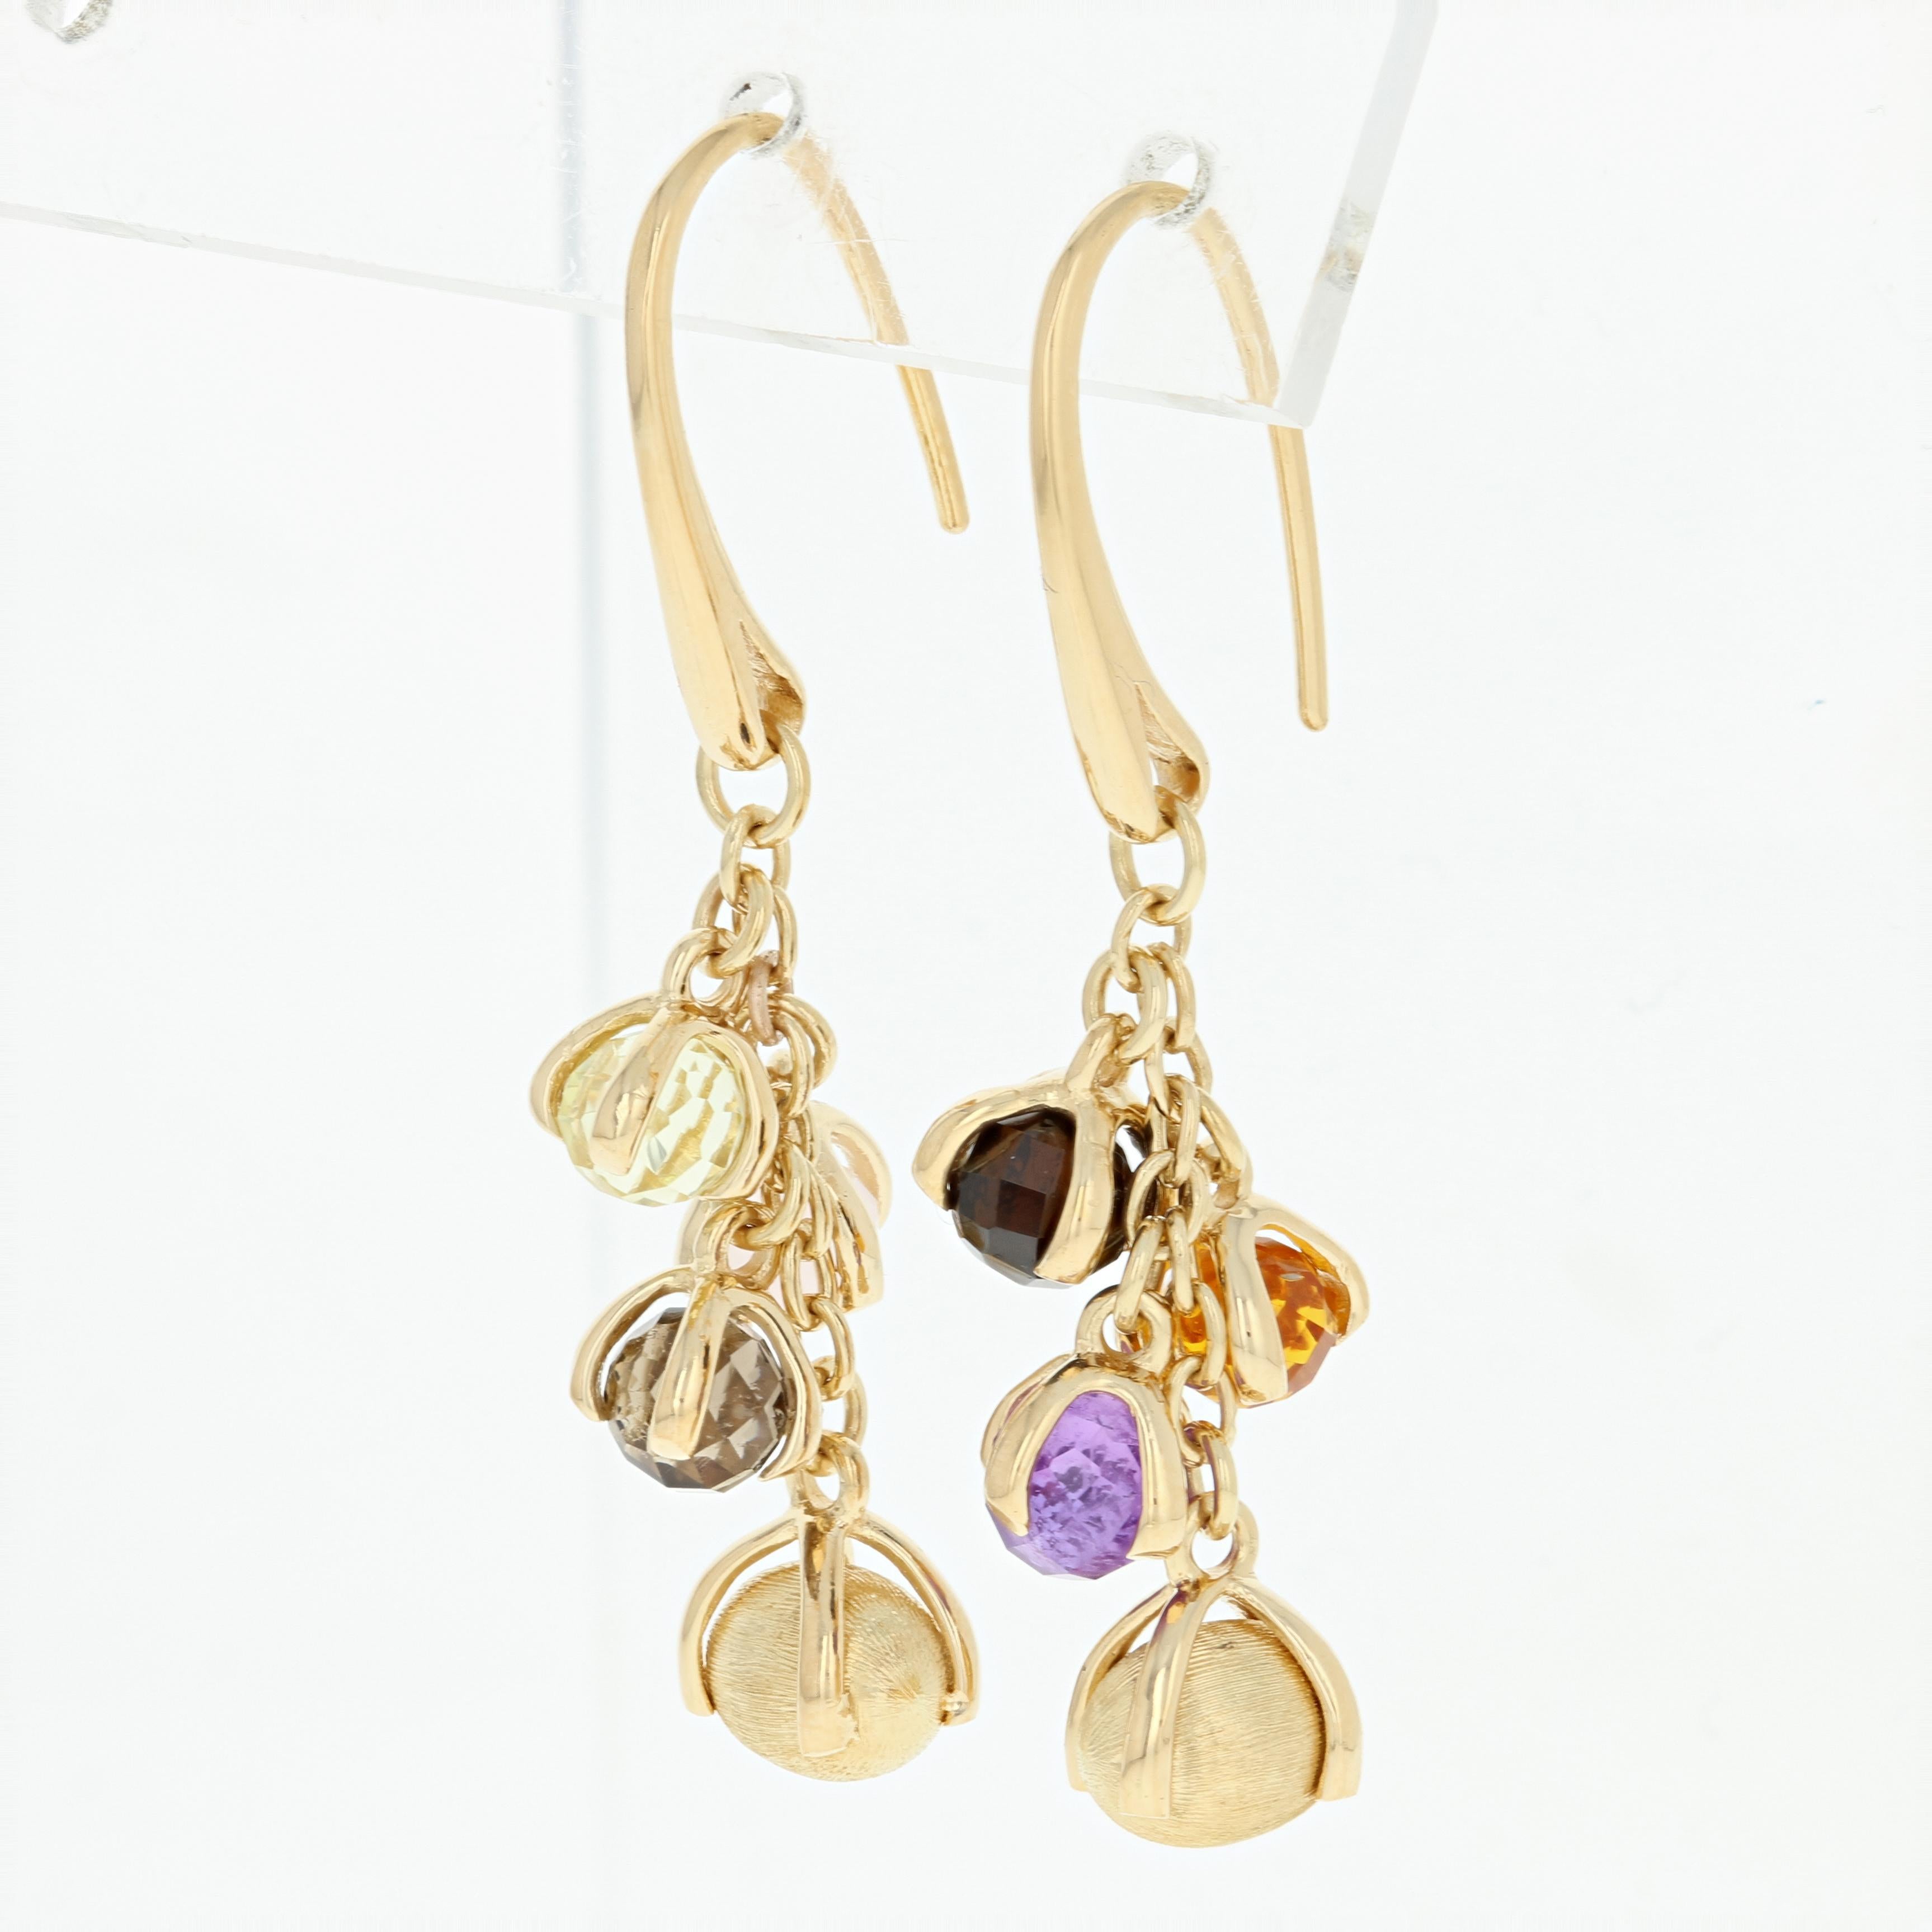 Flirty and playful, these beautiful Nanis earrings will be a delightful addition to your jewelry collection! This 18k yellow gold pair of Italian-made dangles feature glistening gemstone baubles and textured gold drops suspended along cable chain